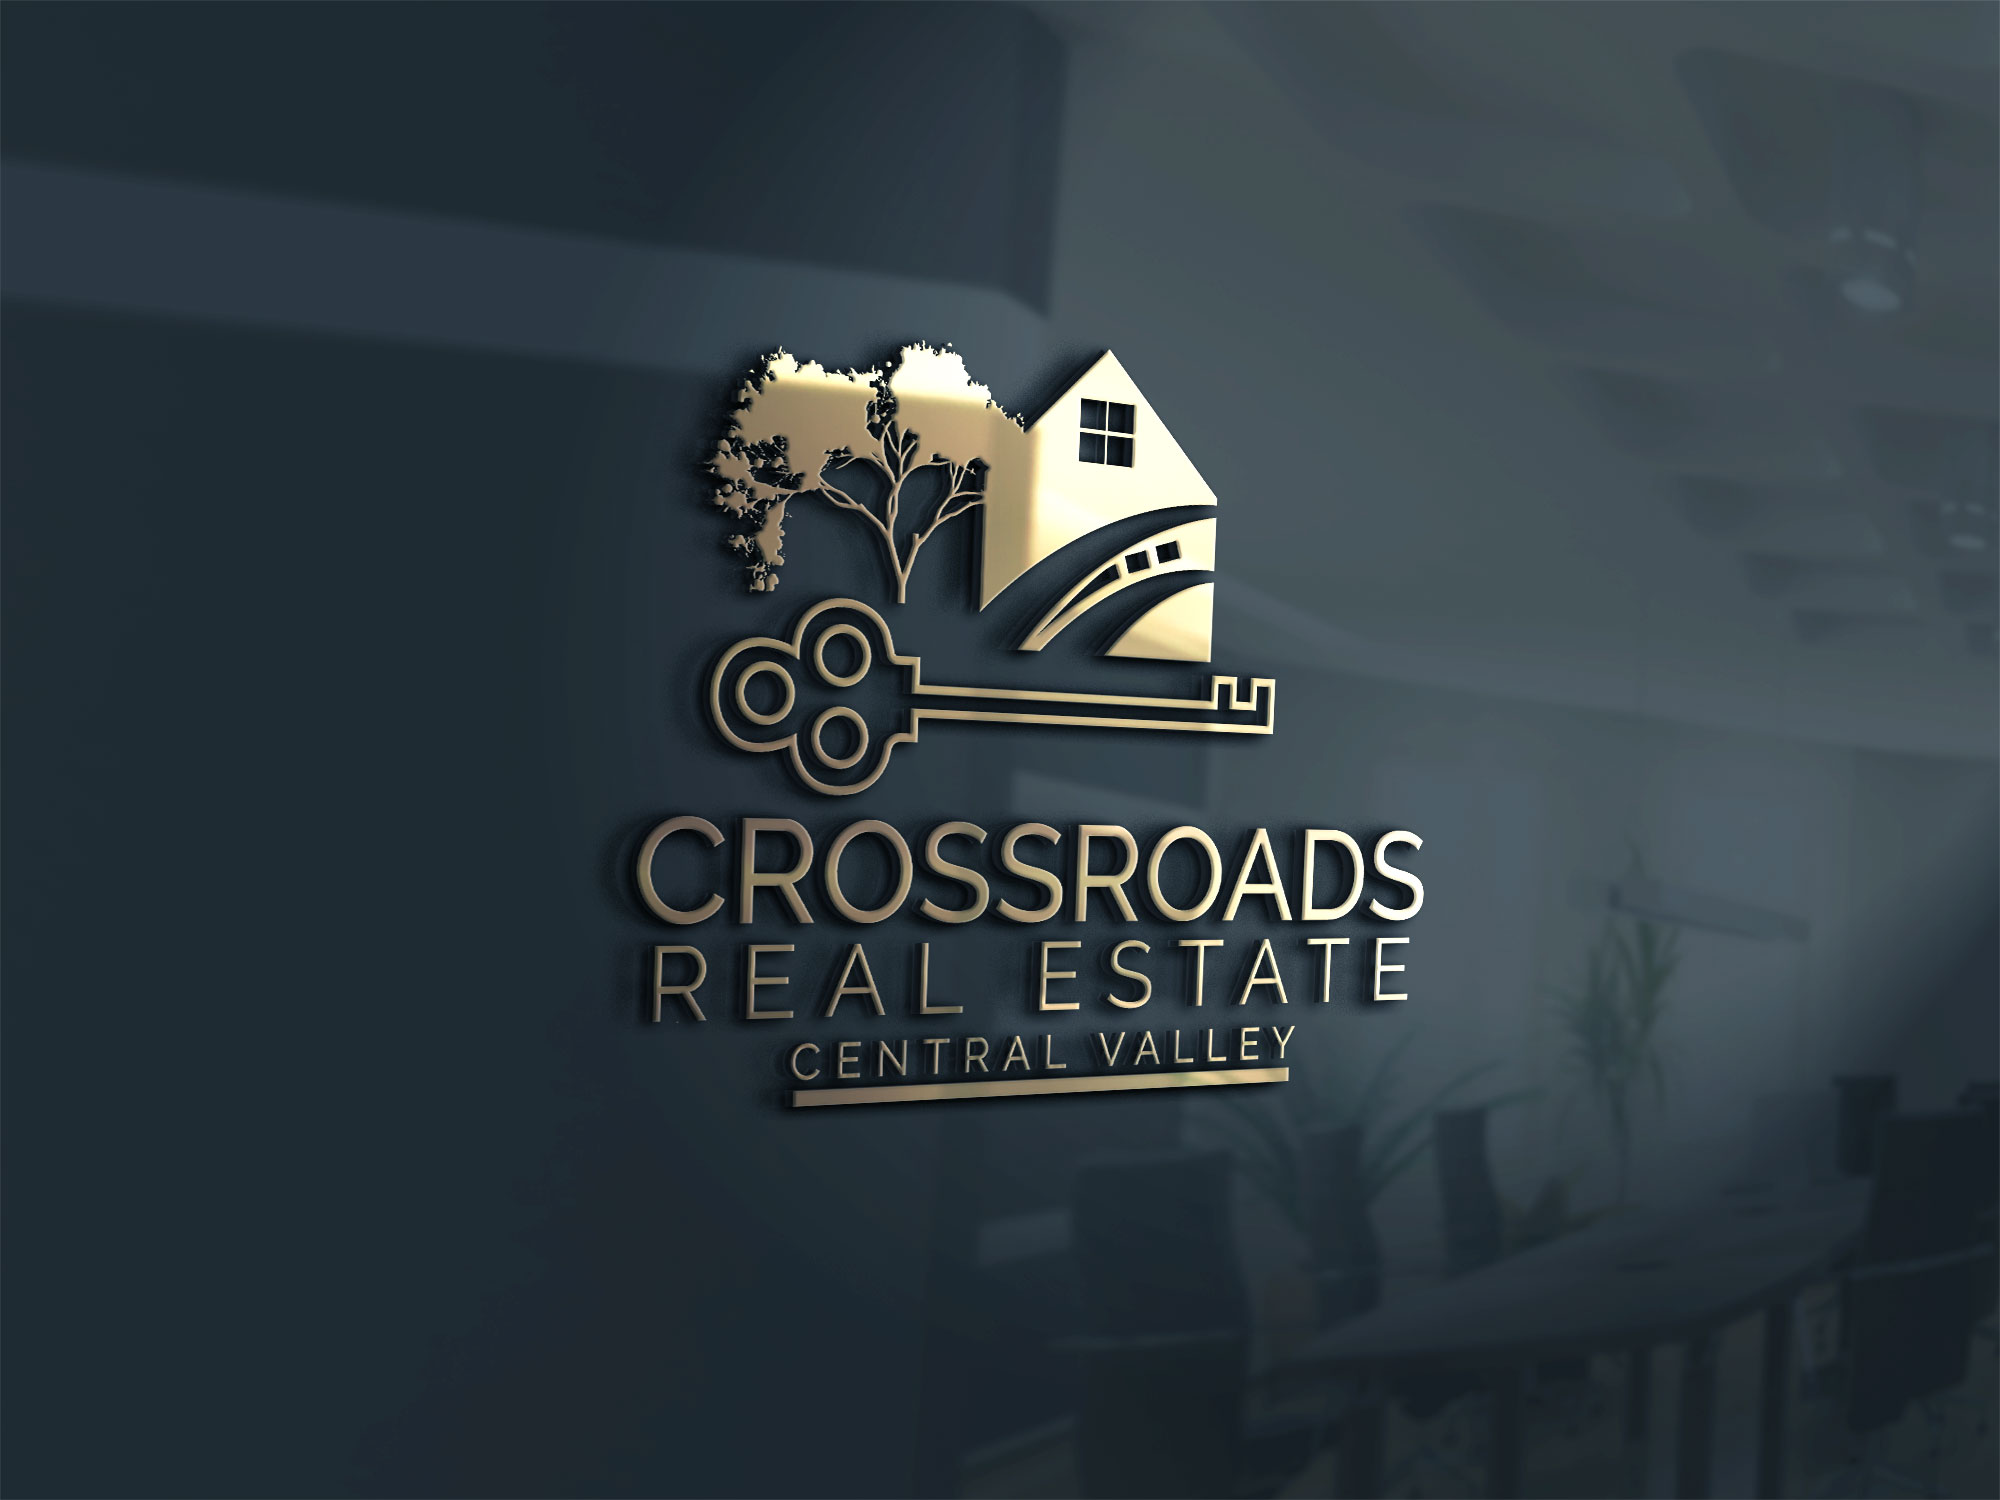 Crossroads Real Estate Central Valley